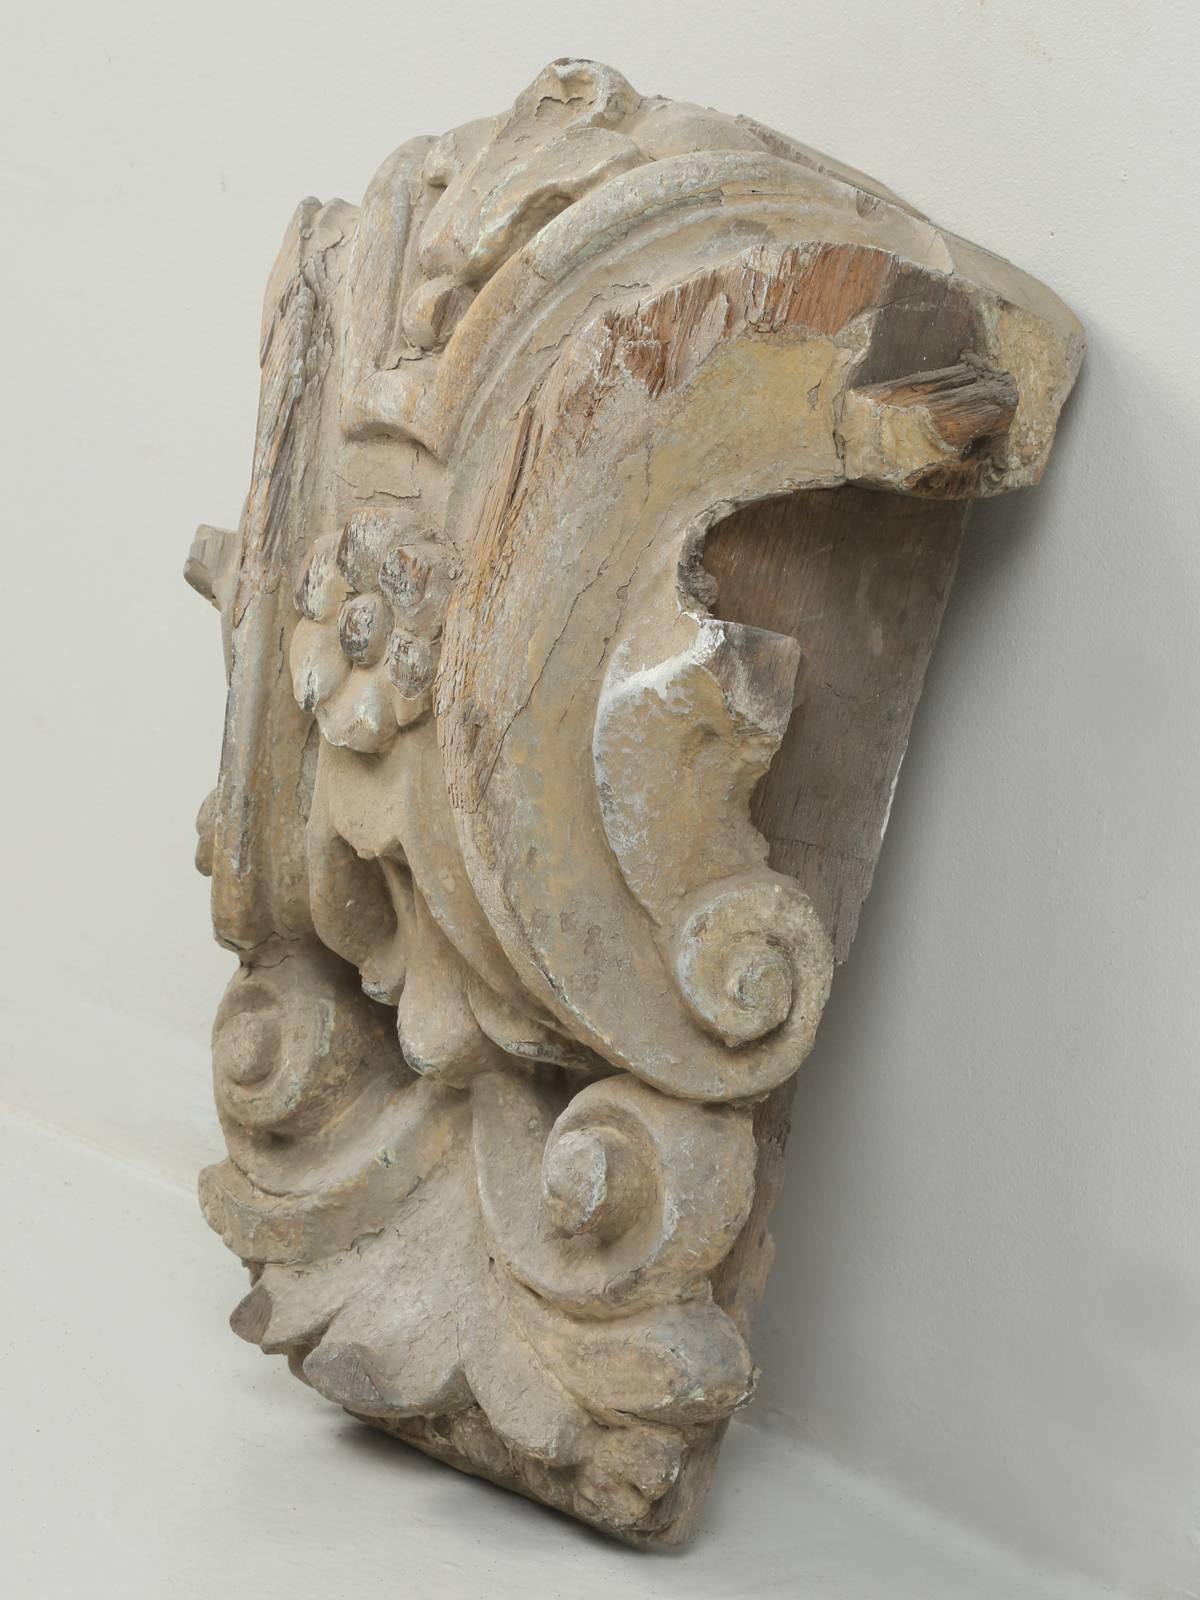 Antique hand-carved Italian decorative element, that we believe is from the 1700s. The finish is a bit hard to describe, but I can say with some clarity, that it appears to not have been touched in at least a 100-years. The fragment is quite heavy